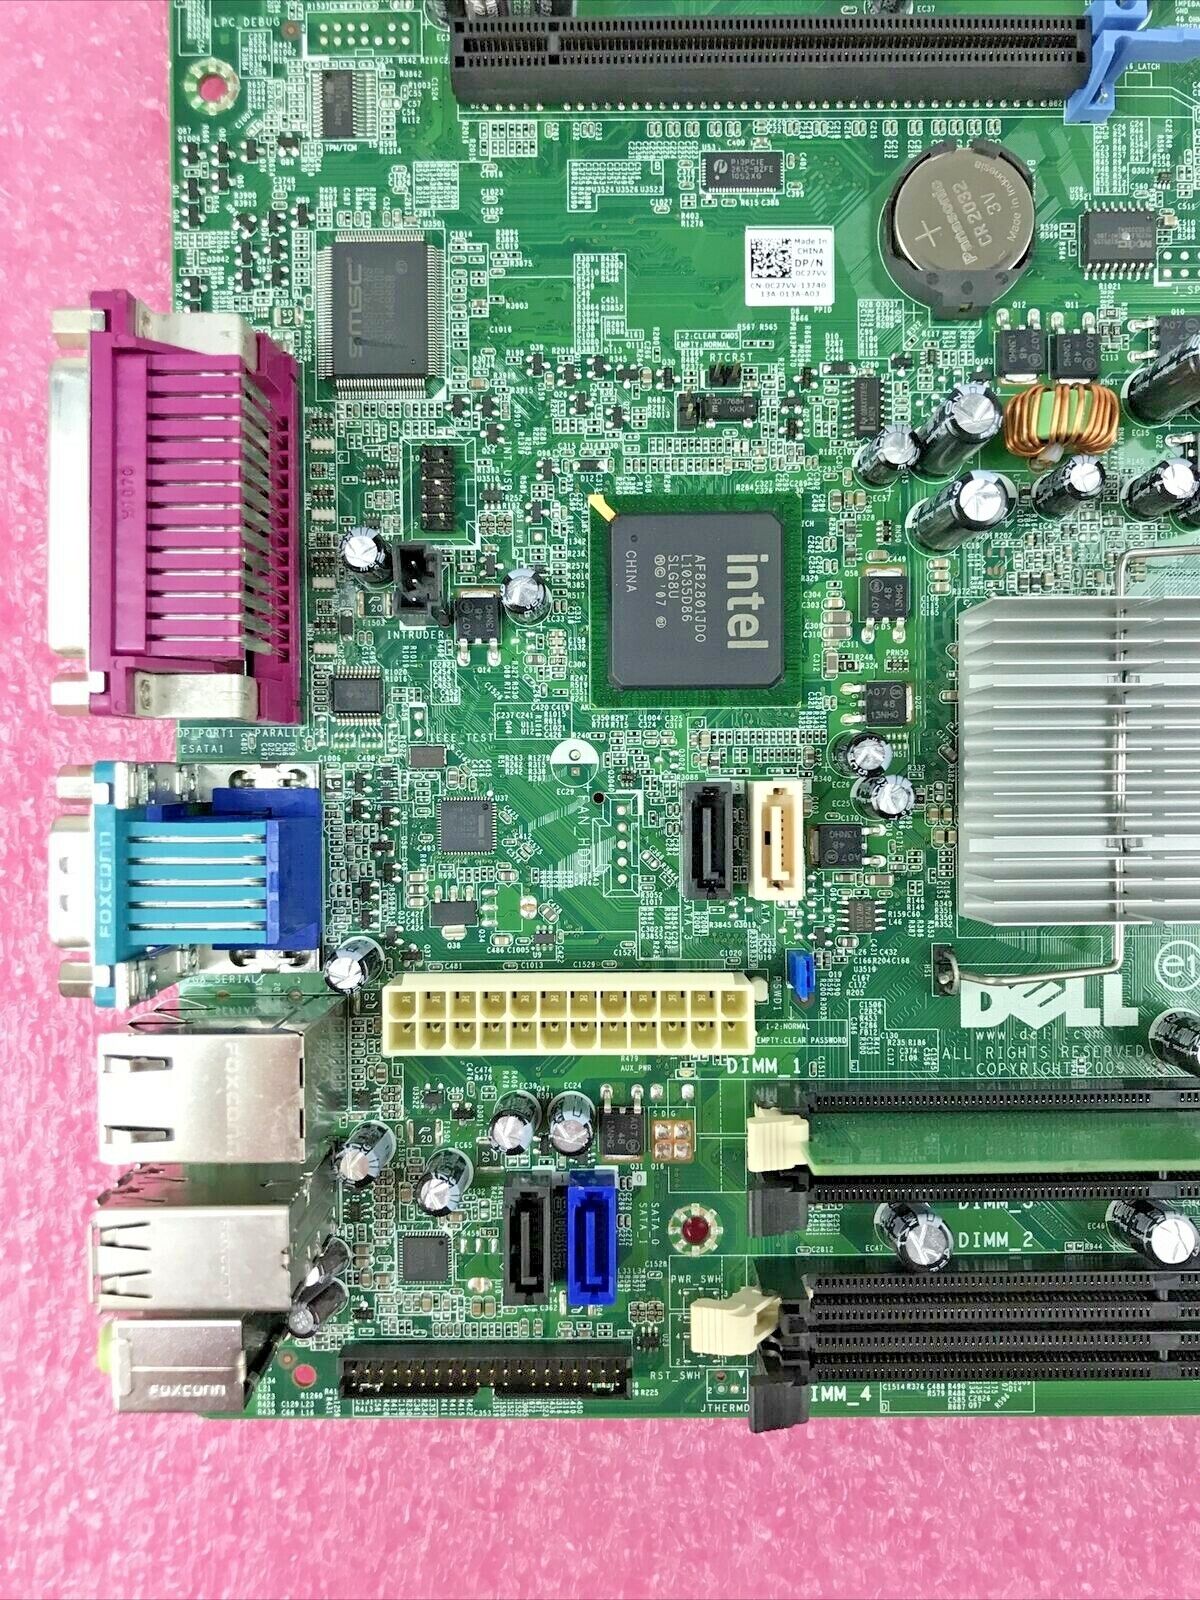 Dell OC27VV Motherboard Intel Core 2 Quad Q9400 2.66GHz with 2GB RAM